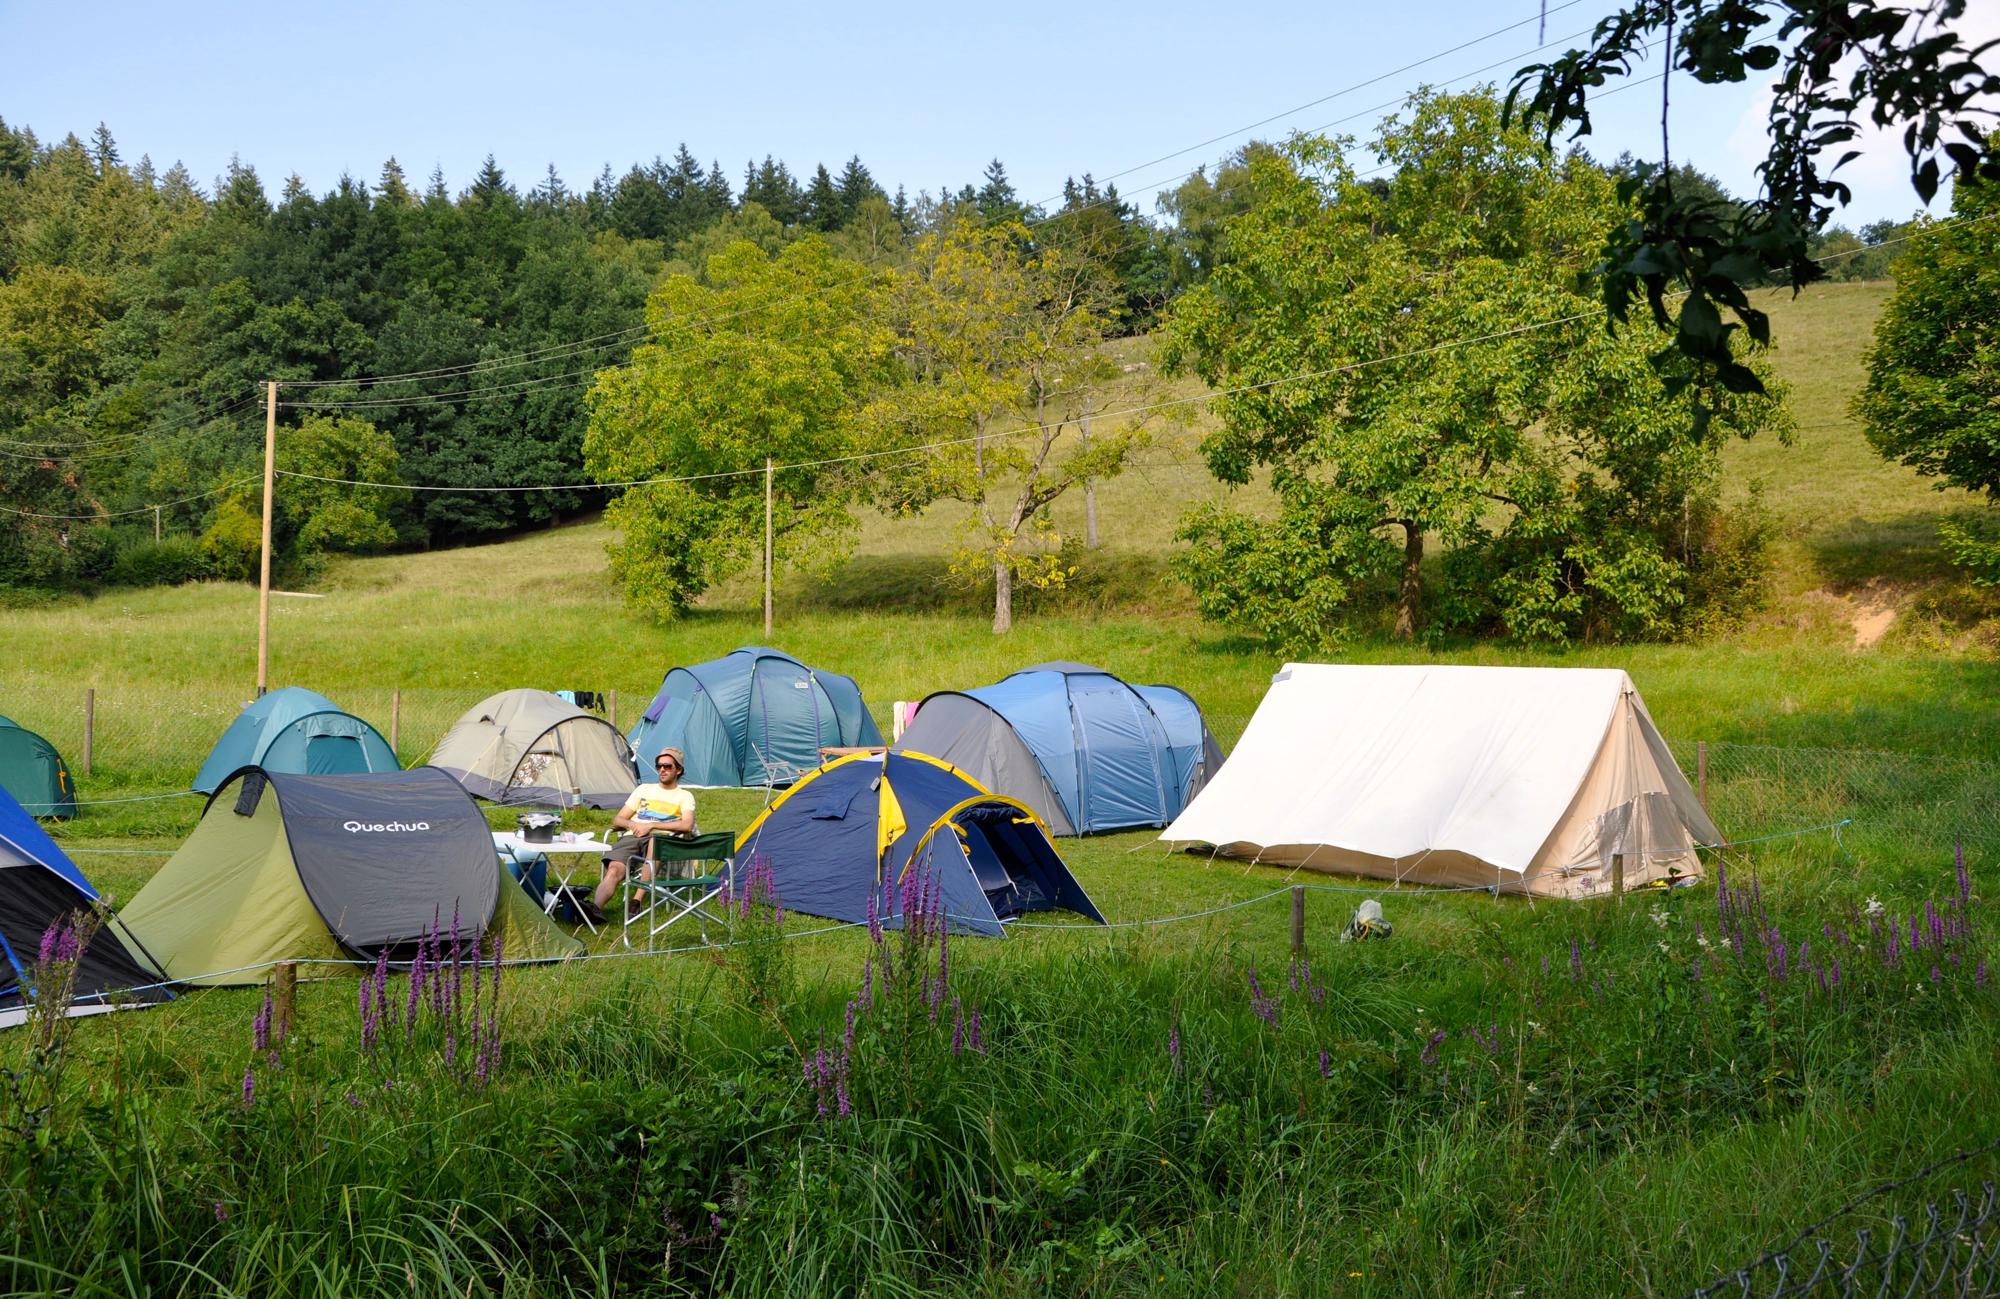 Campsites in Germany – Recommended Campsites in Germany